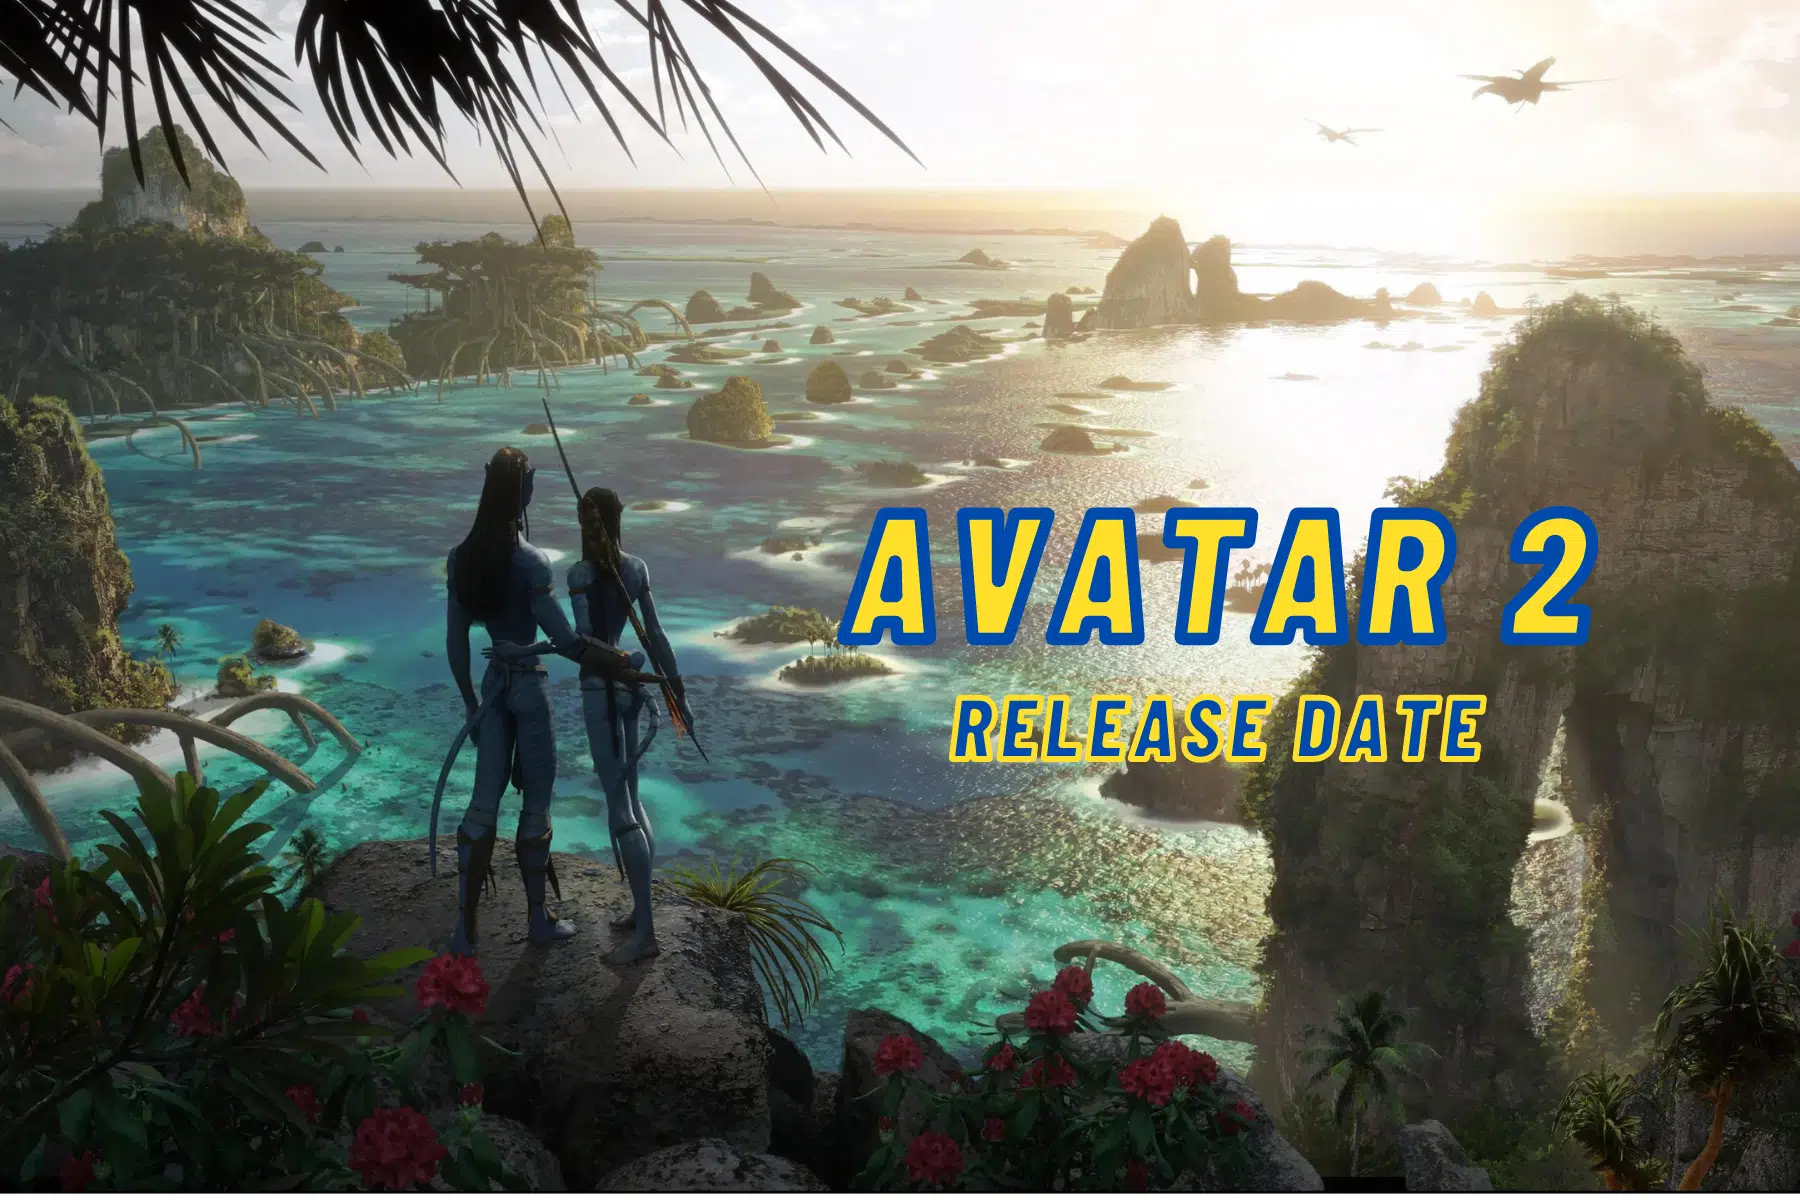 Avatar 2 2022 Release Date, Trailer - Is it Canceled?